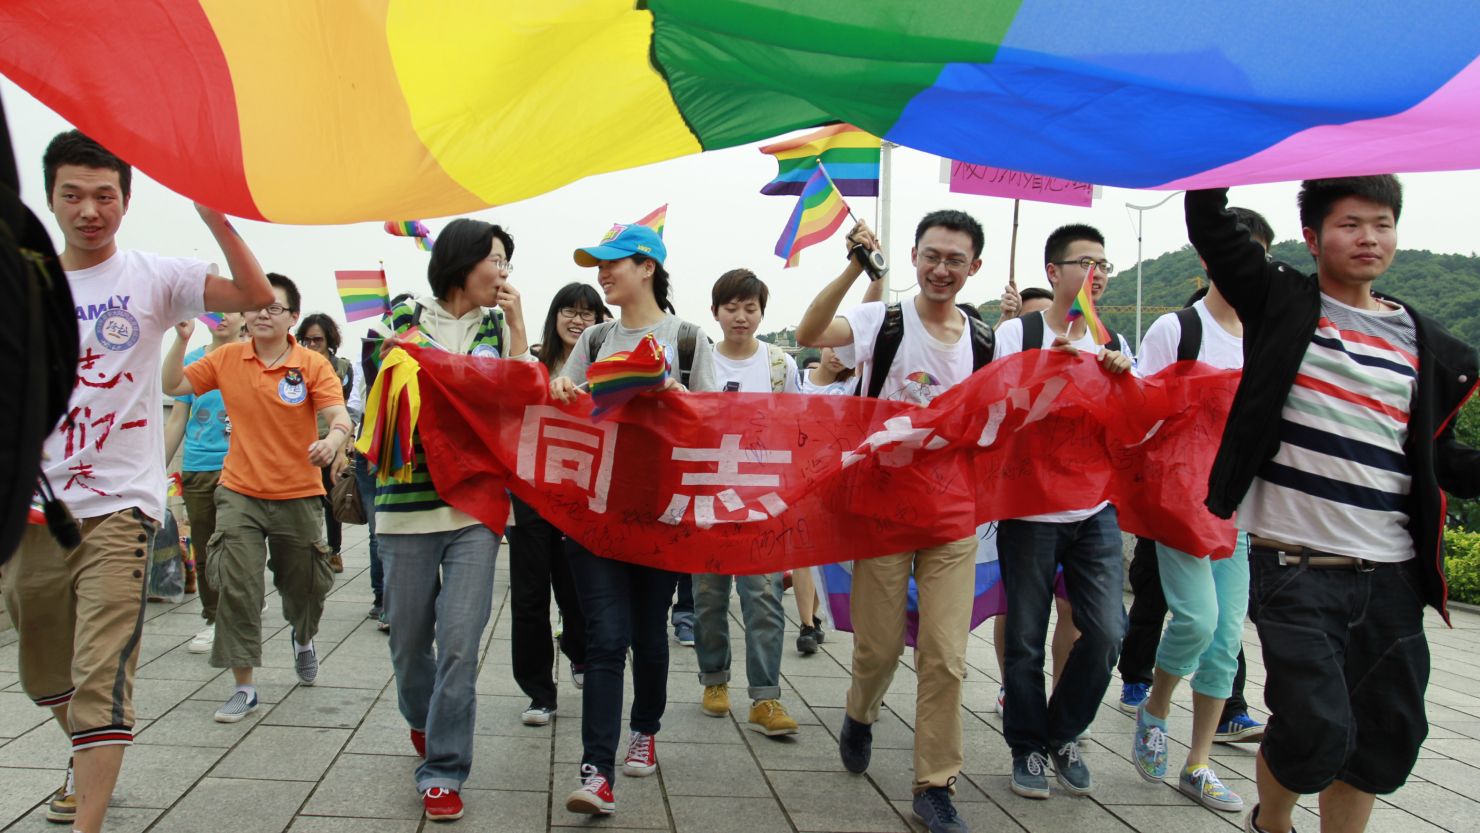 Attitudes towards gay rights are gradually shifting in China. Two decades ago, gay couples could face arrest under sodomy laws. 
